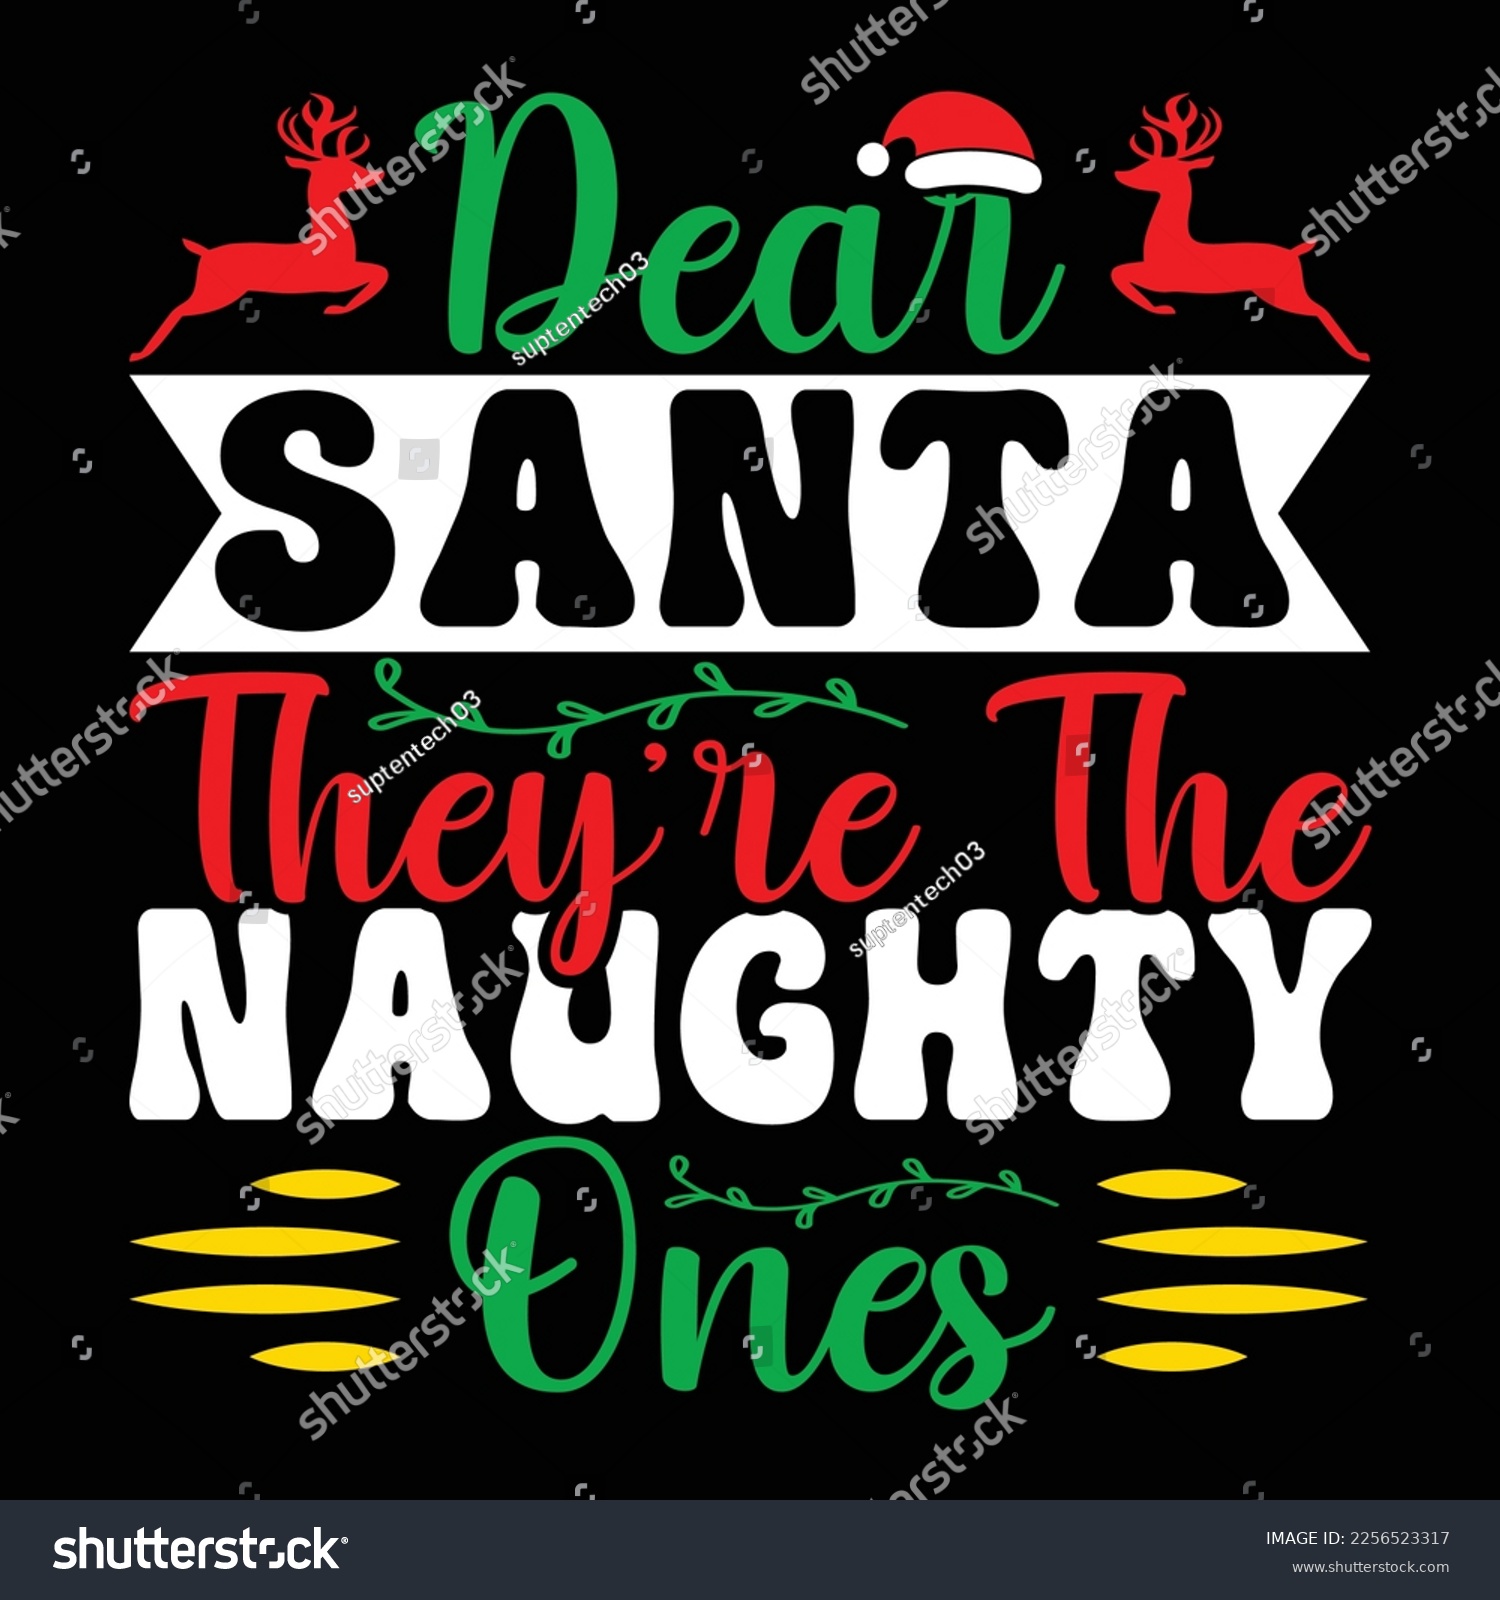 SVG of Dear Santa They Re The Naughty Ones; Merry Christmas shirts Print Template, Xmas Ugly Snow Santa Clouse New Year Holiday Candy Santa Hat vector illustration for Christmas hand lettered svg